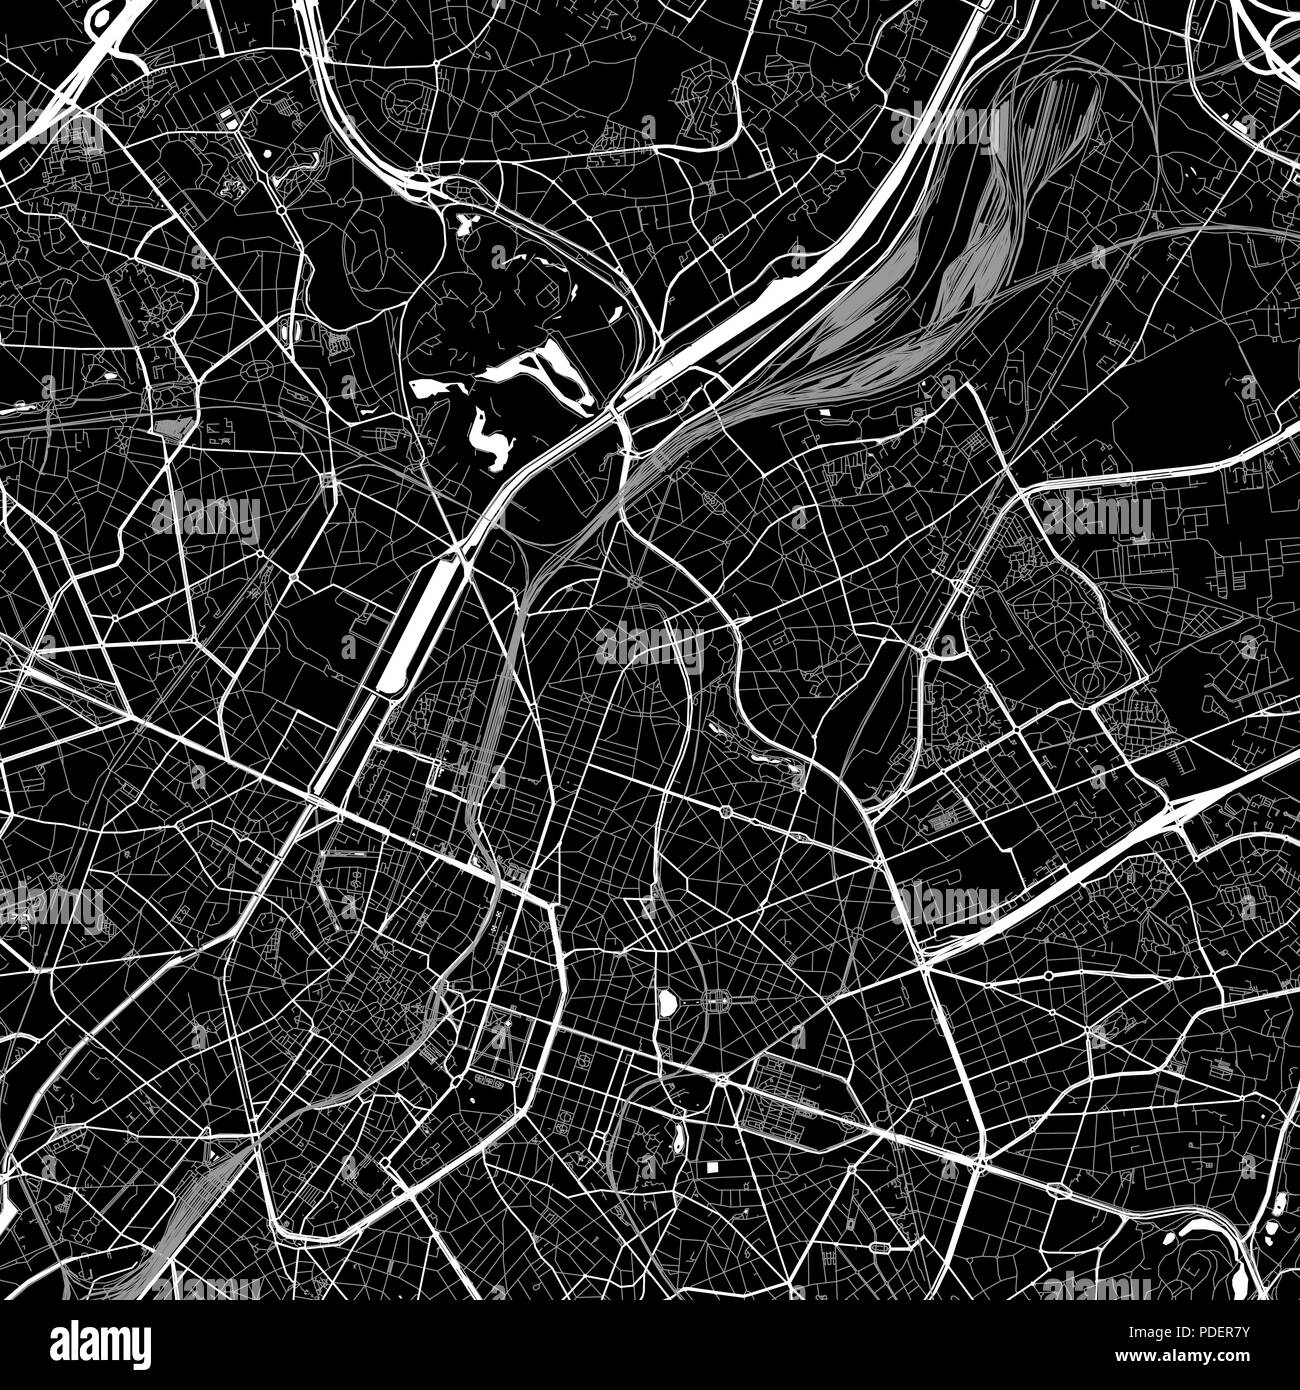 Area map of  Schaerbeek, Belgium. Dark background version for infographic and marketing. This map of  Schaerbeek, Brussels-Capital Region, contains st Stock Vector